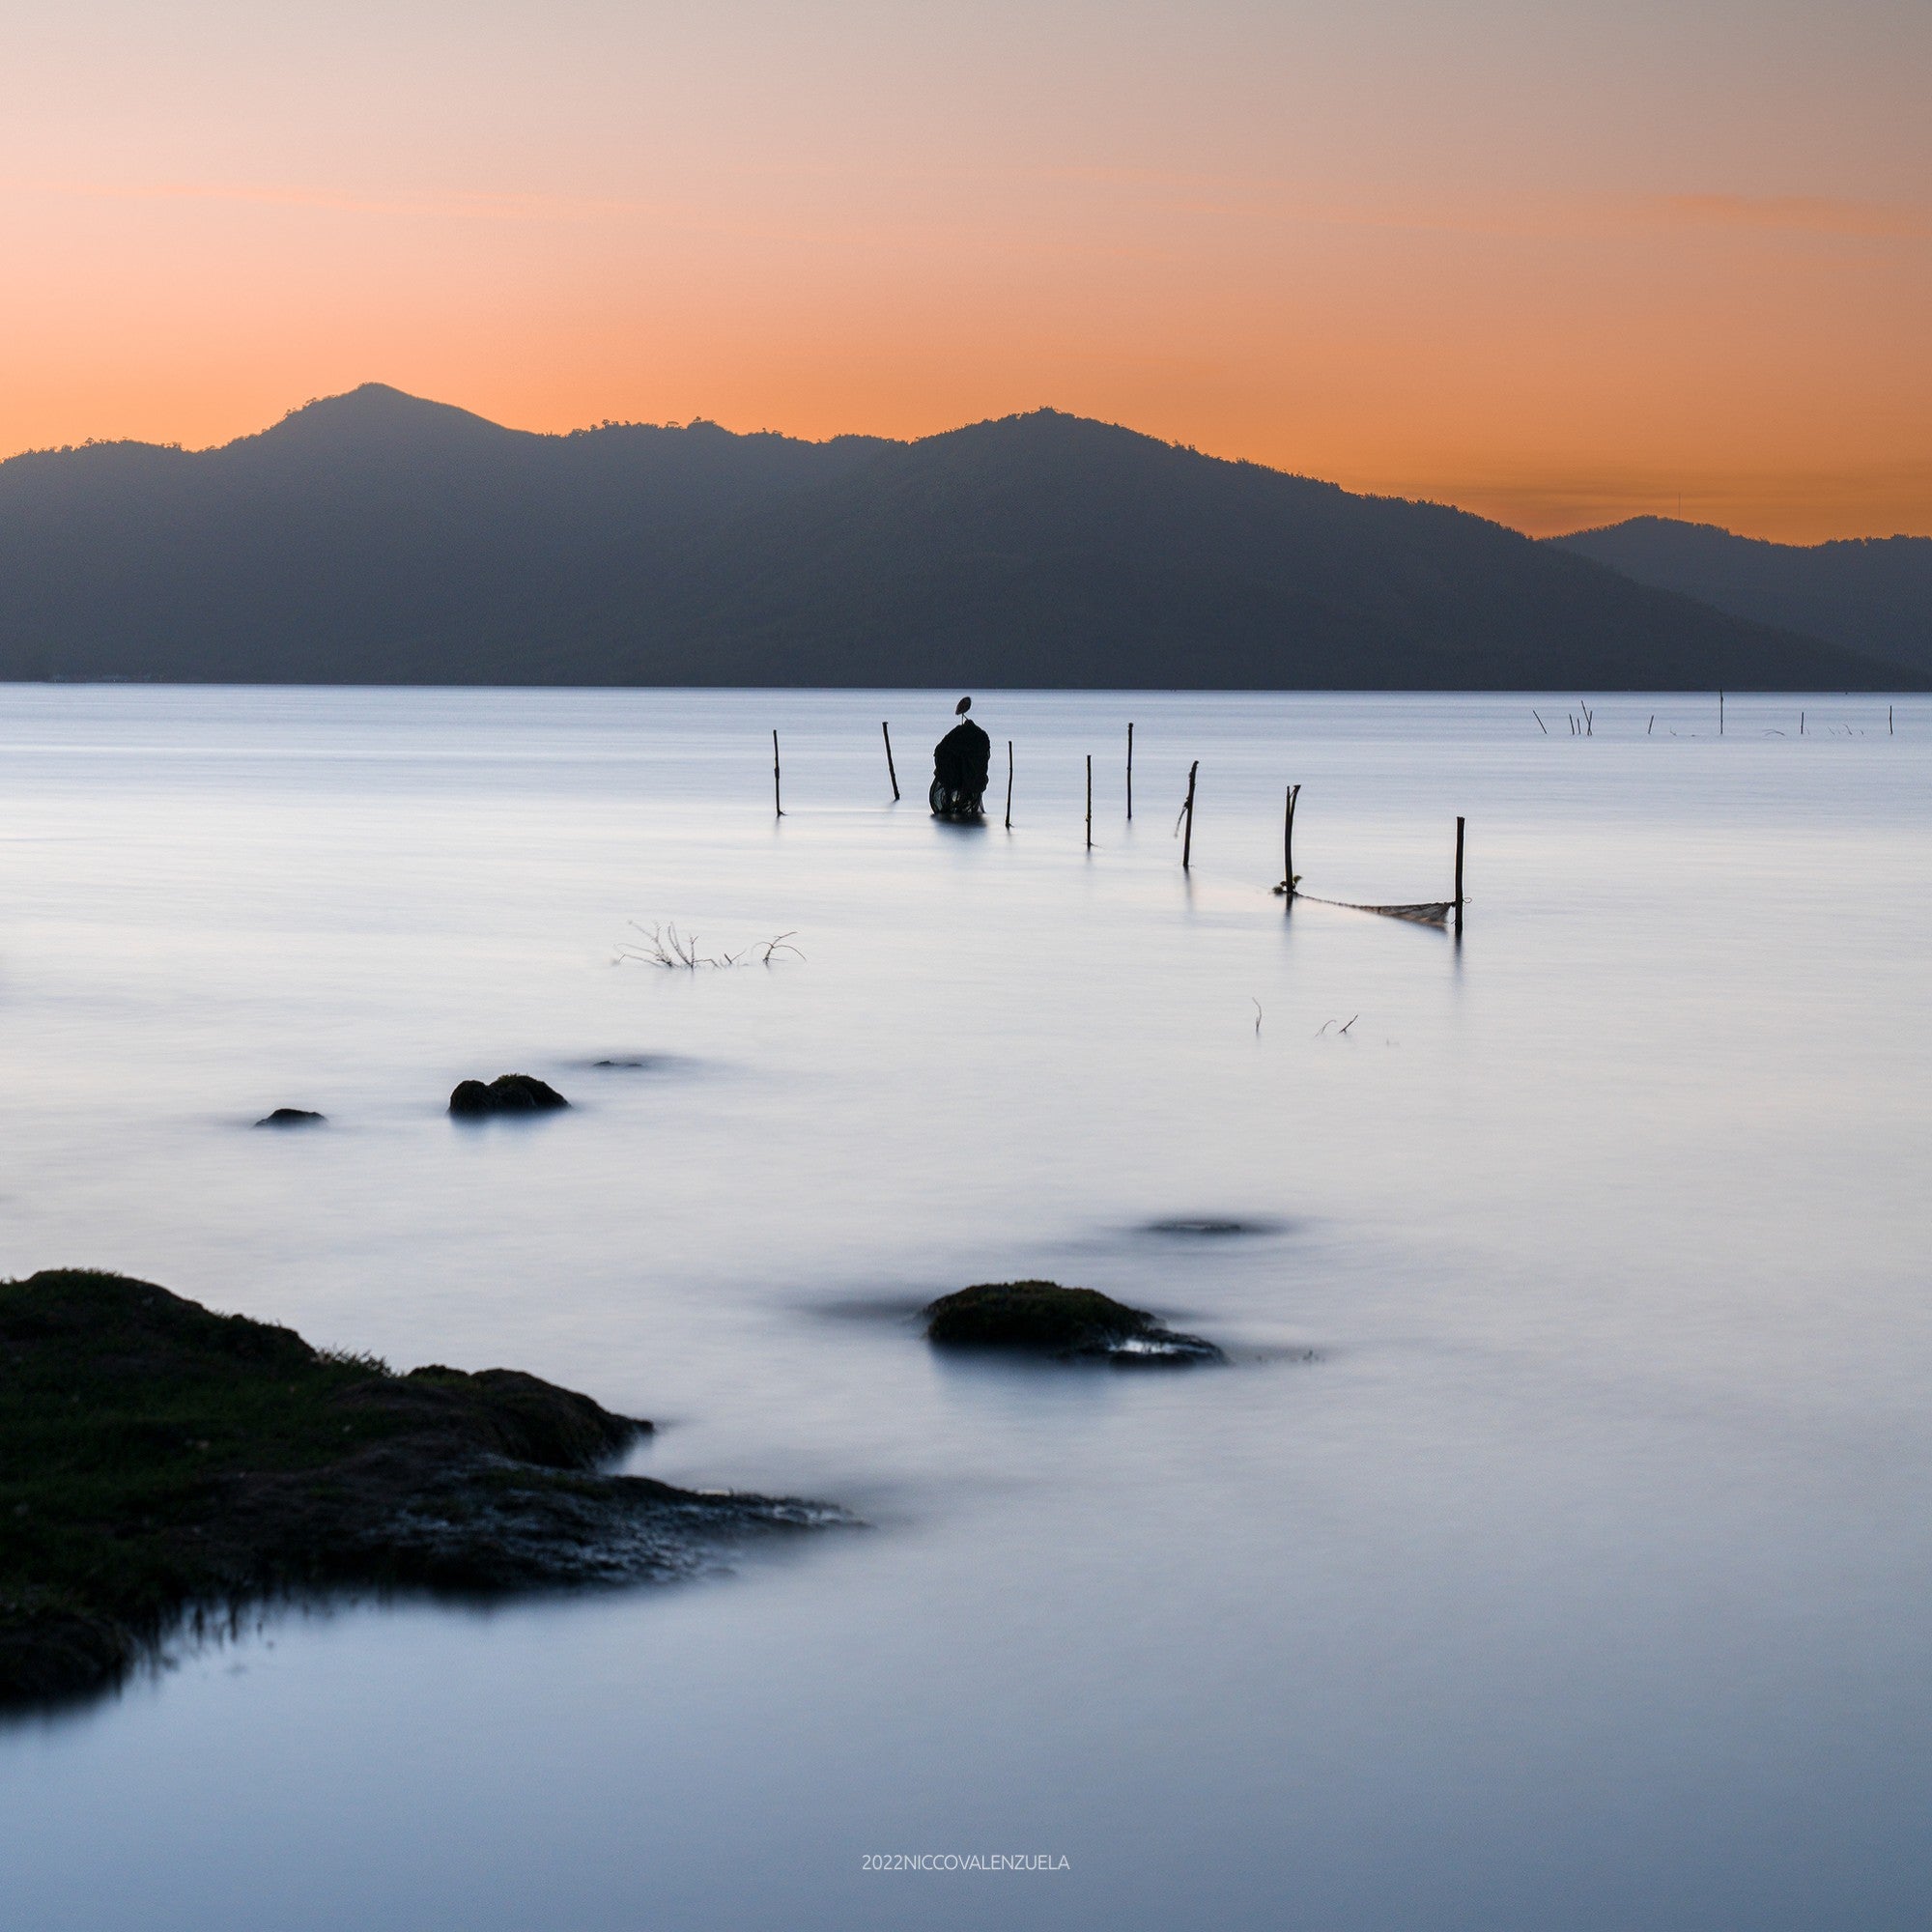 negative space and direction at landscape photography